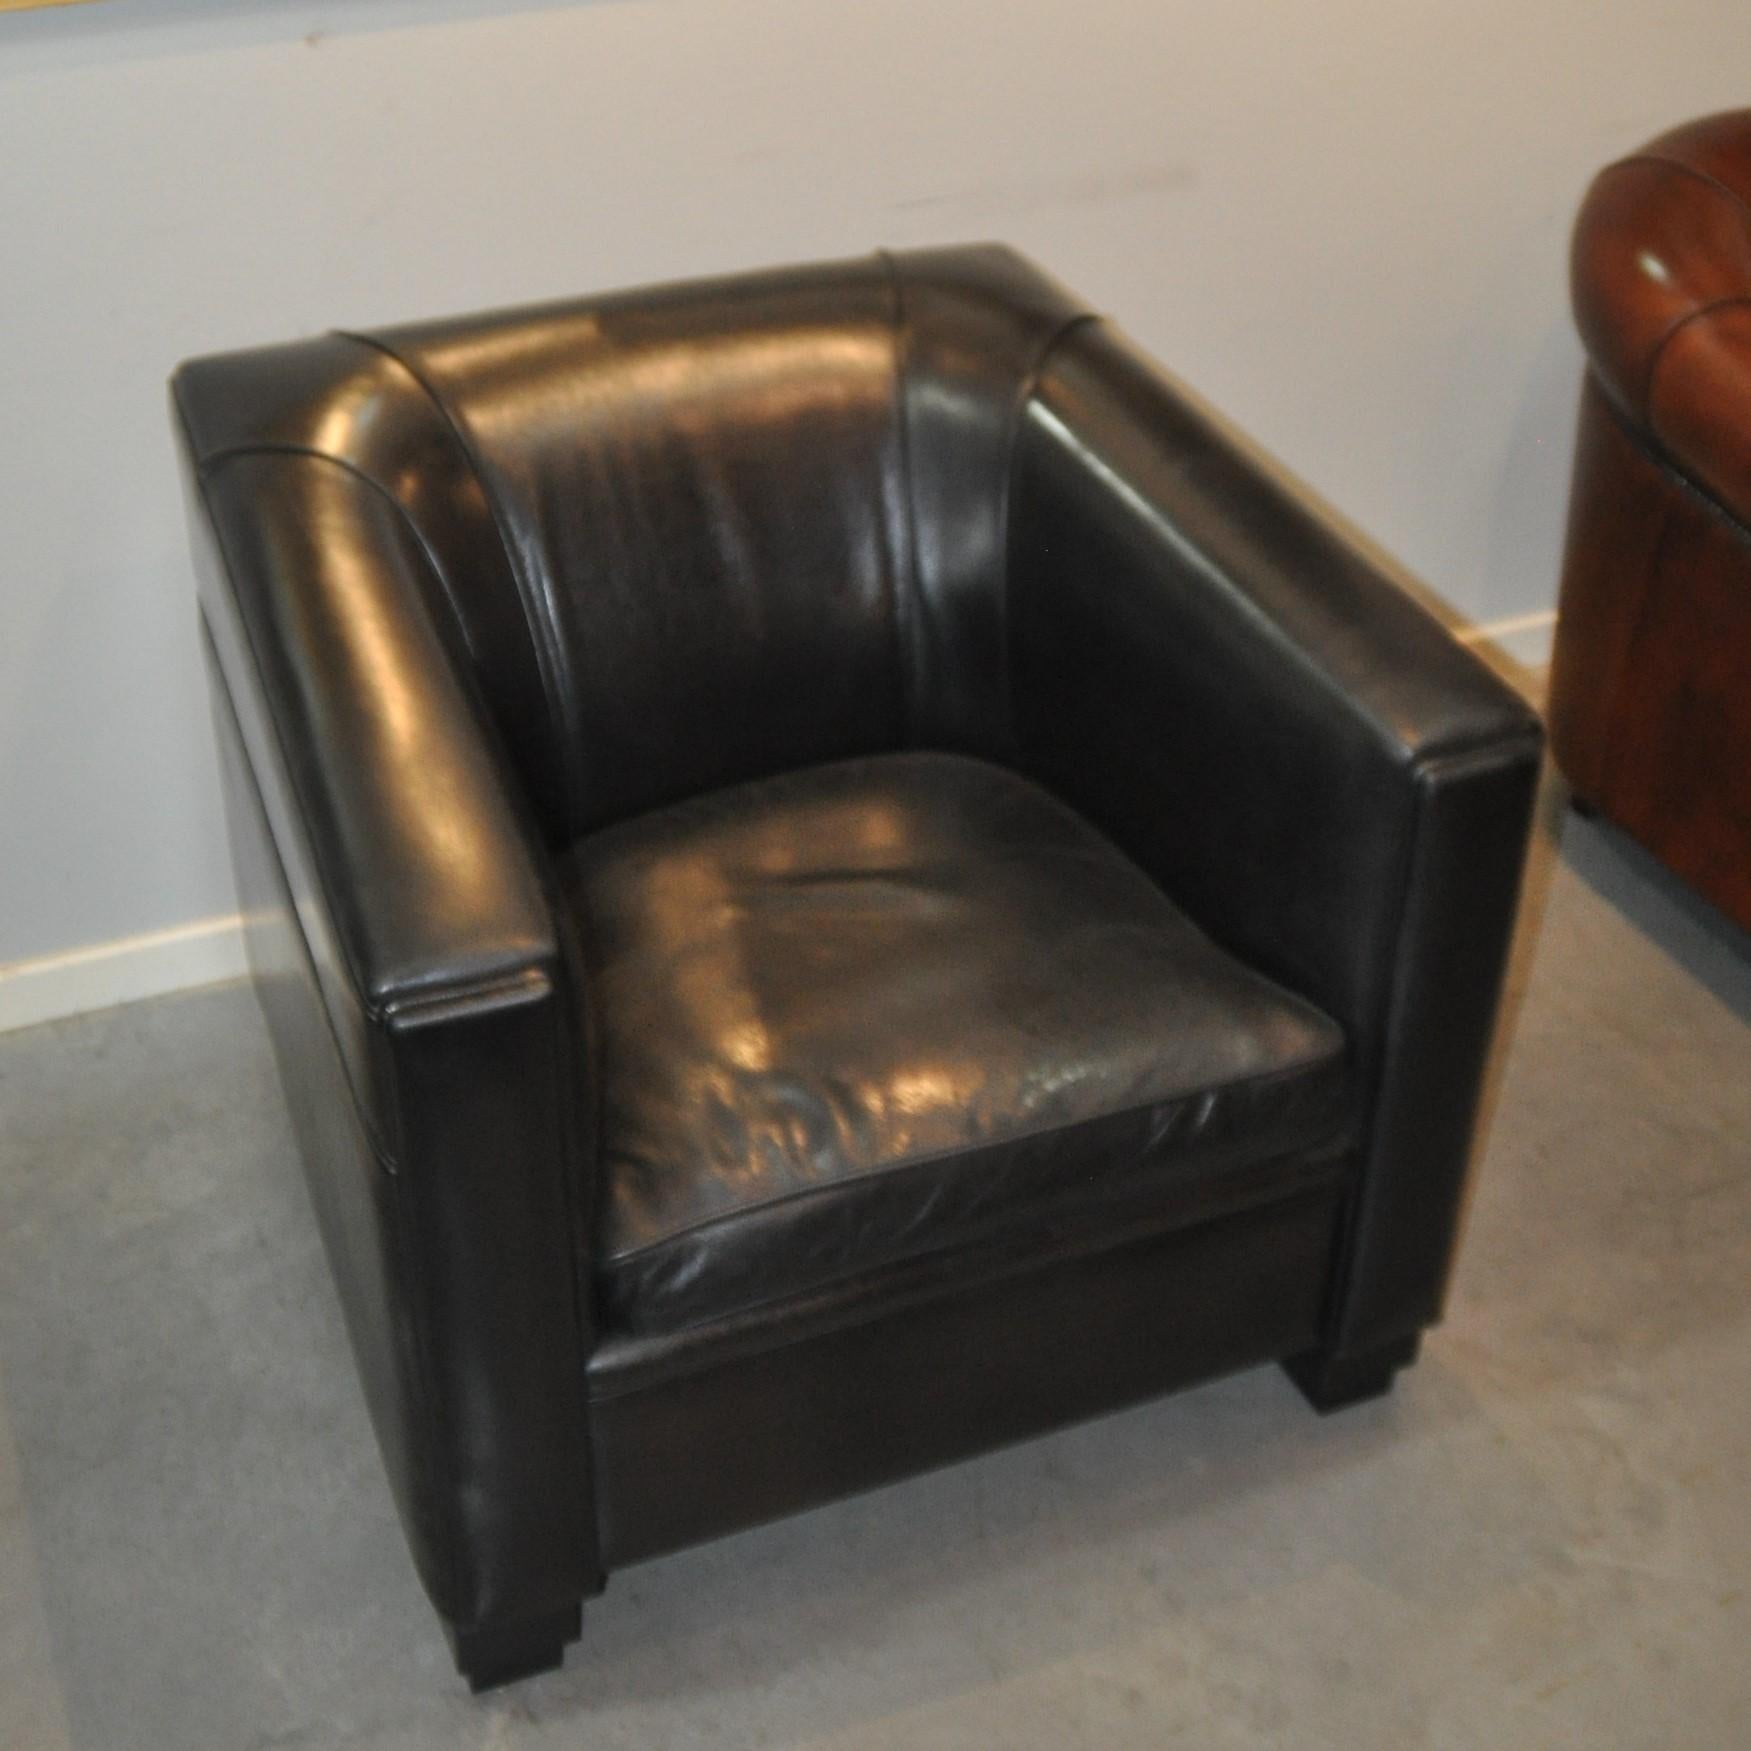 Sheep Leather Lounge Chair in Art Deco Style by Lounge Atelier Model, Texas 1